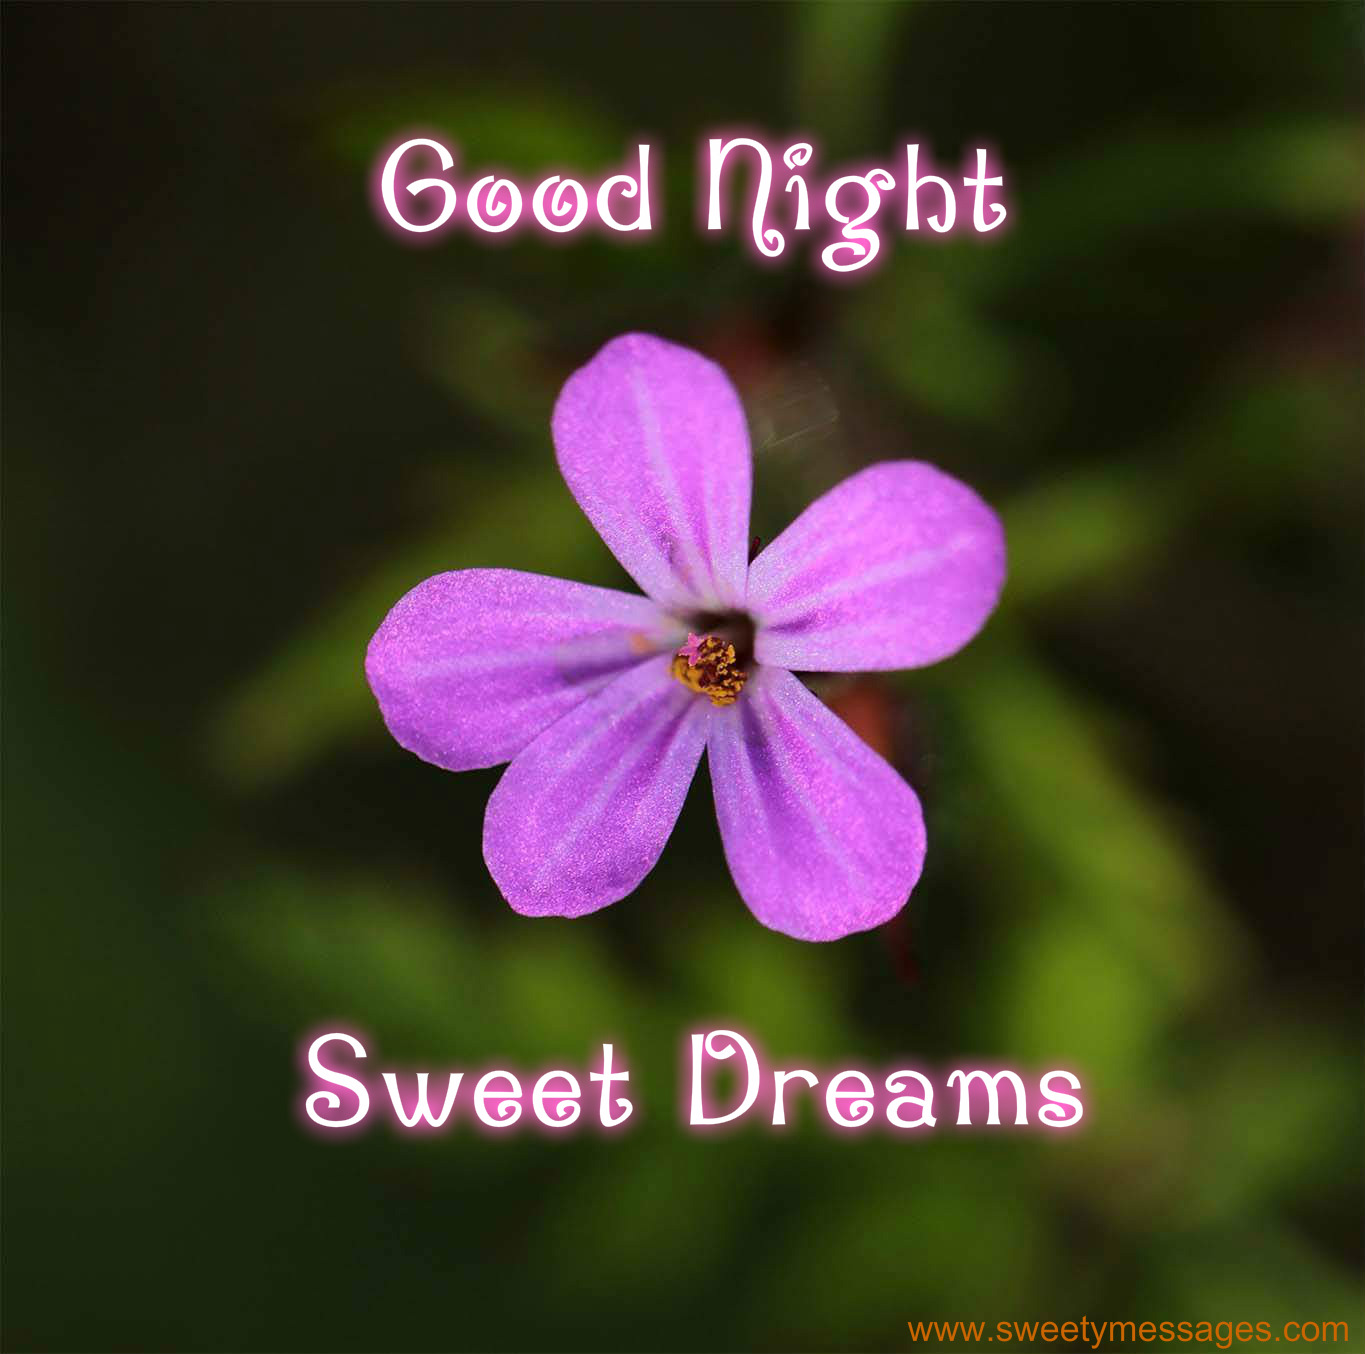 HAVE A NICE SLEEP IMAGES - Beautiful Messages